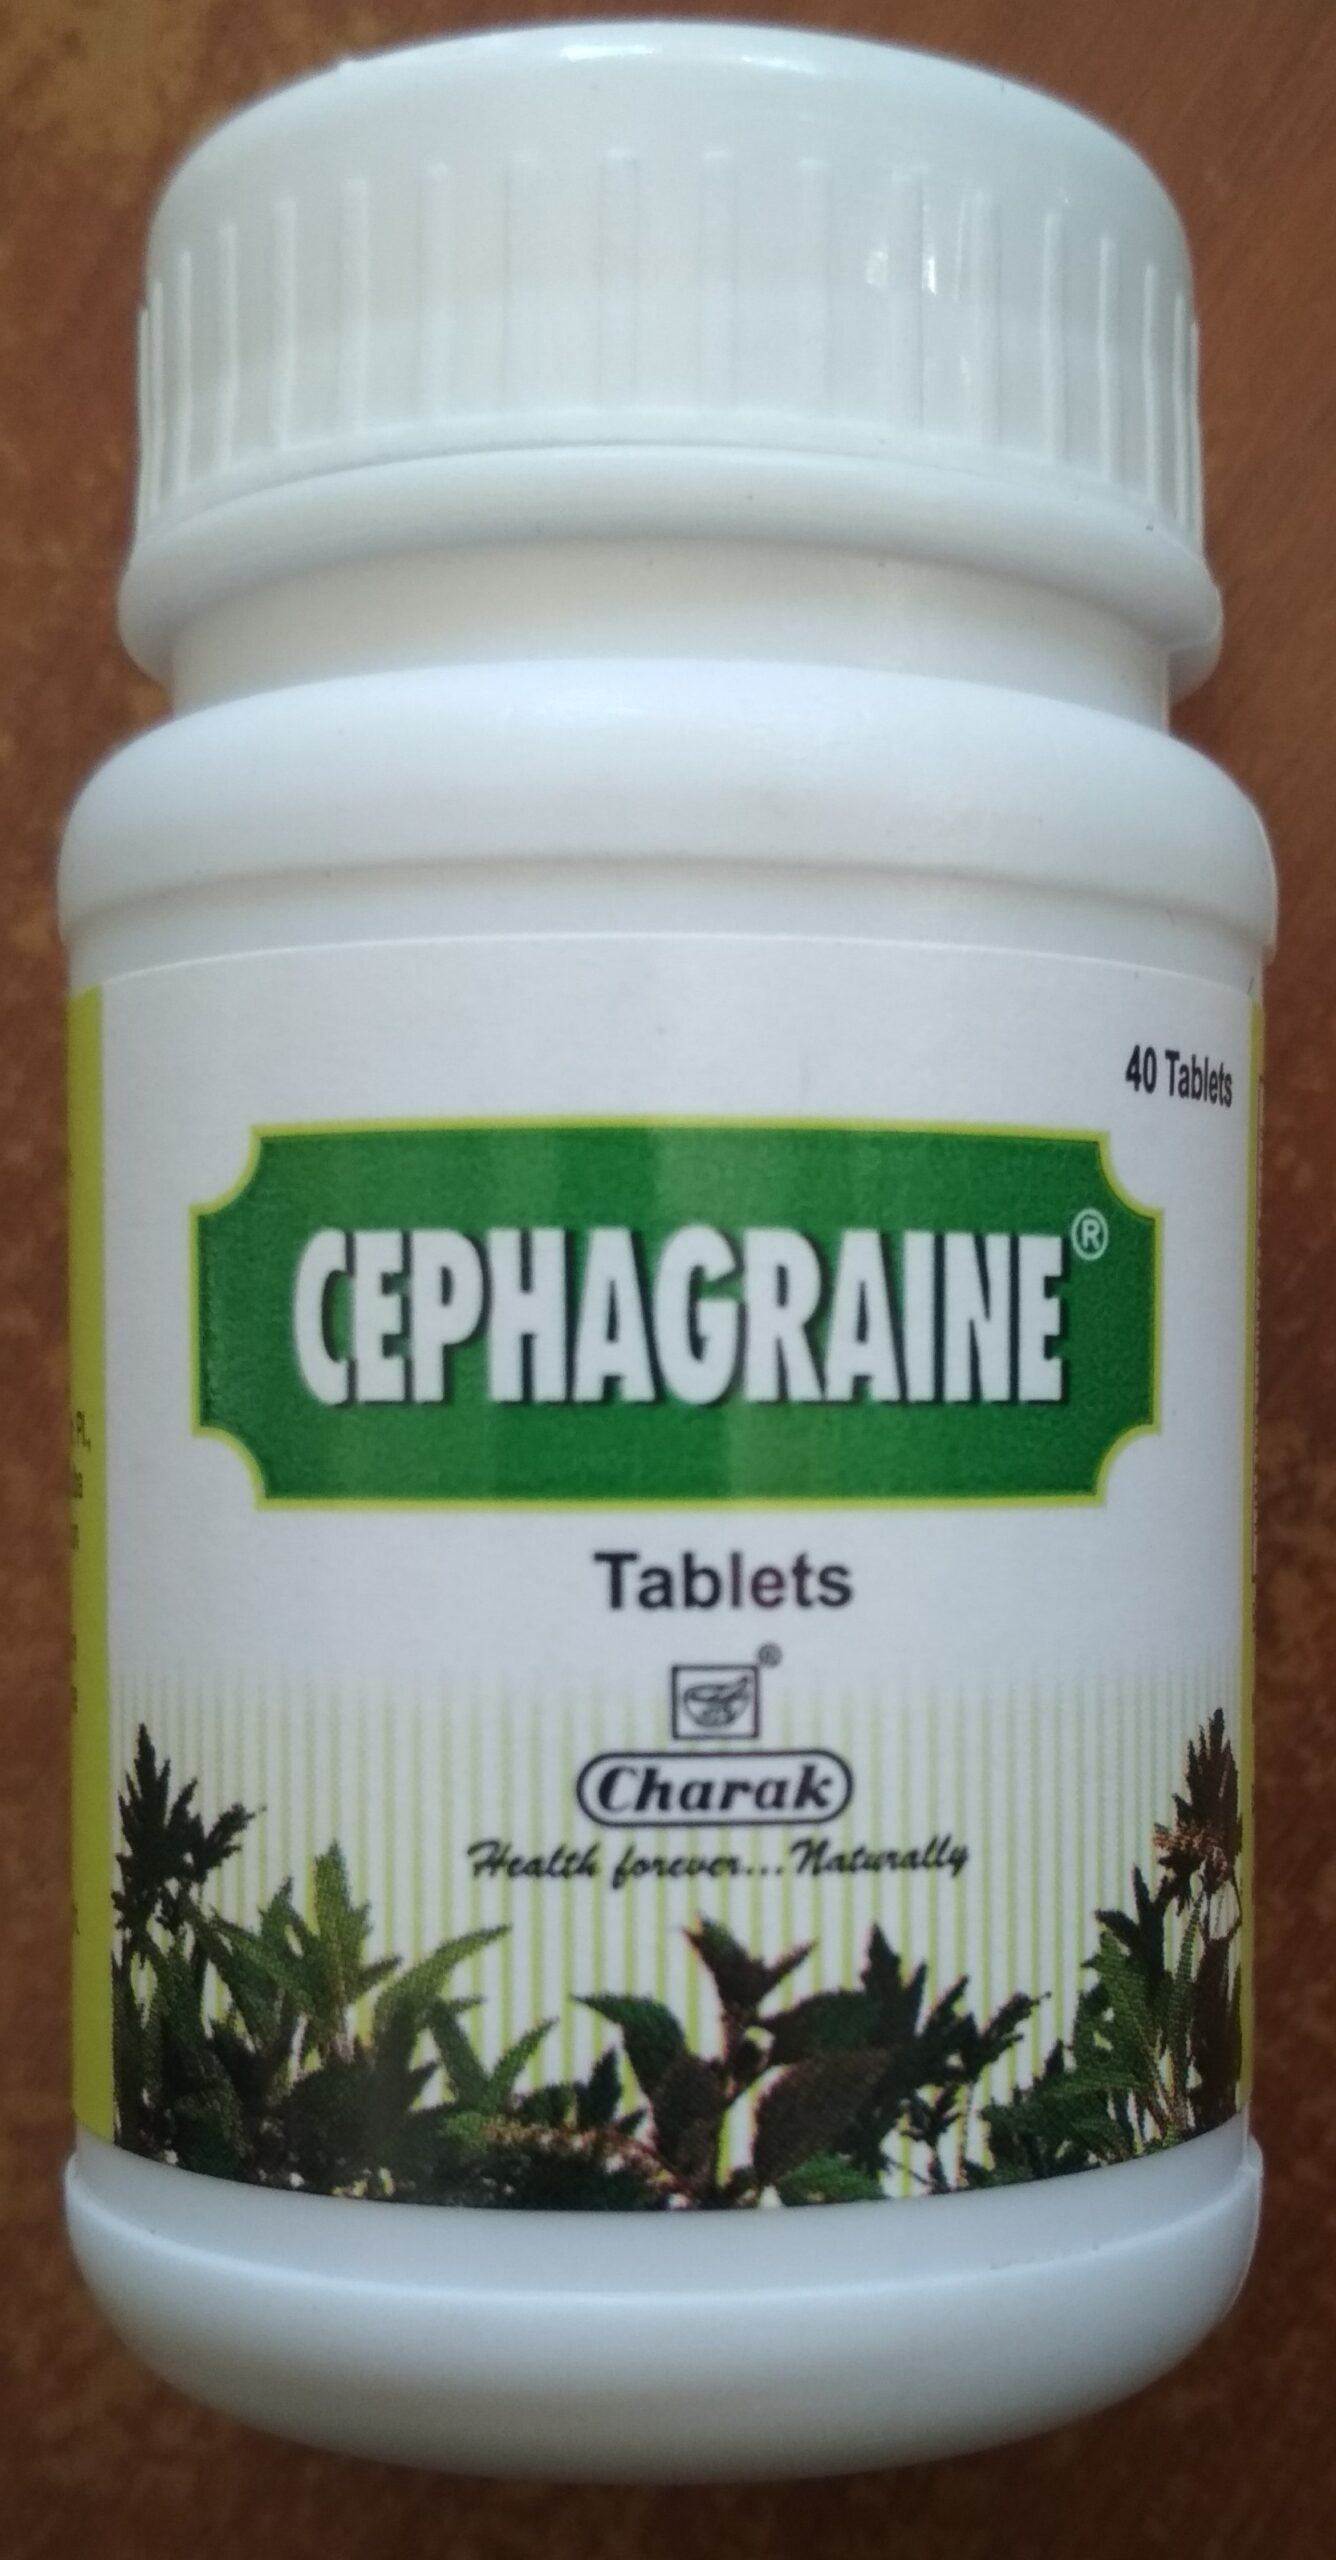 cephagraine 40 tablets upto 15% off charak phytocare